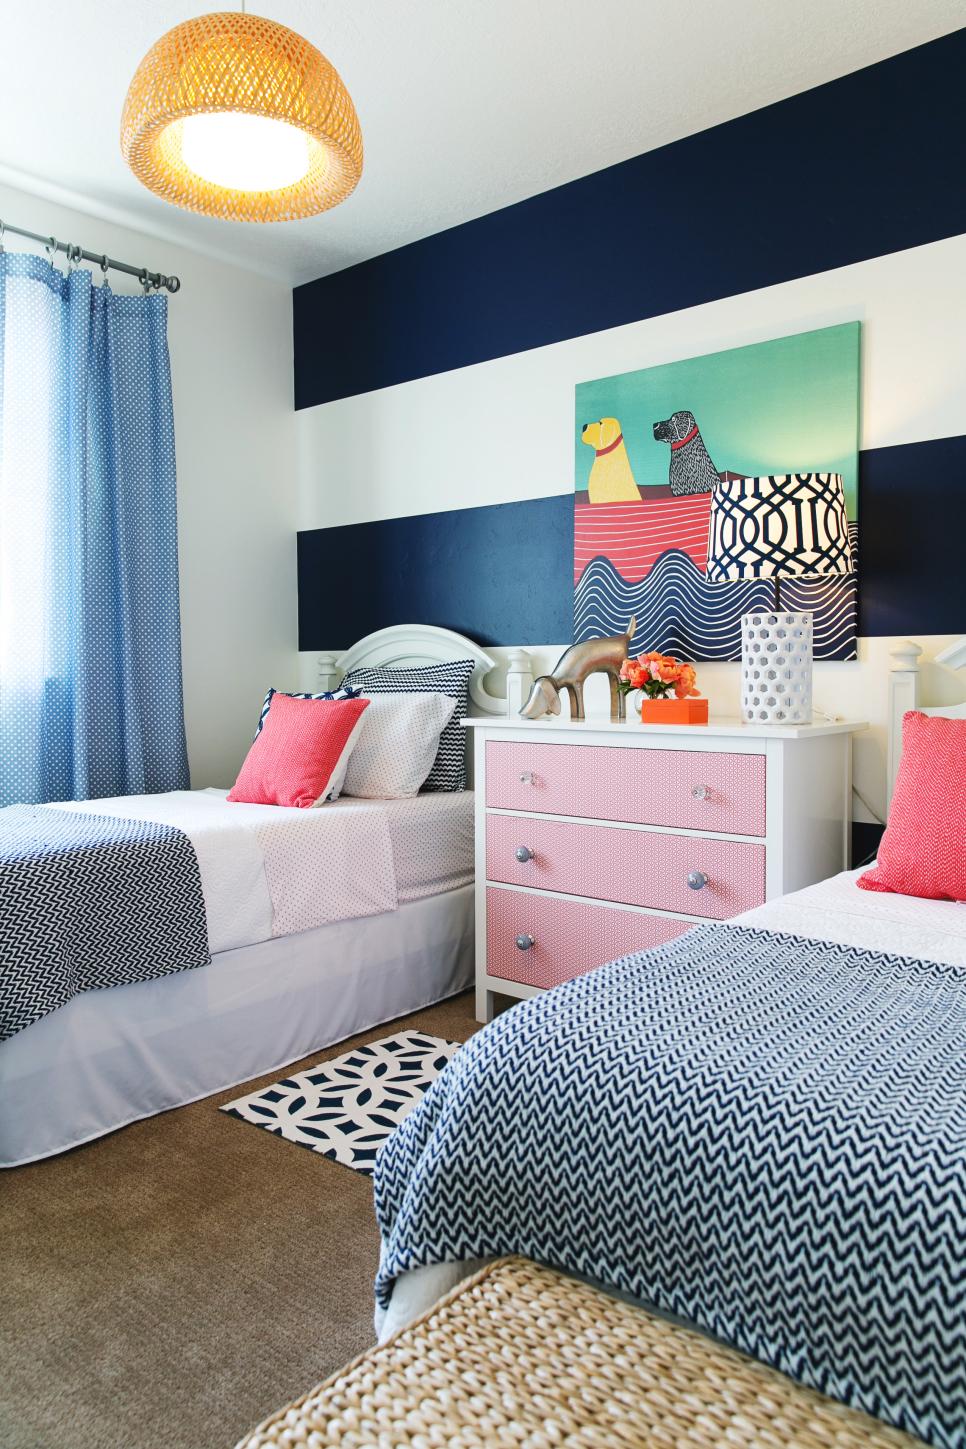 Girl's Contemporary Bedroom With Twin Beds and Striking Art | HGTV